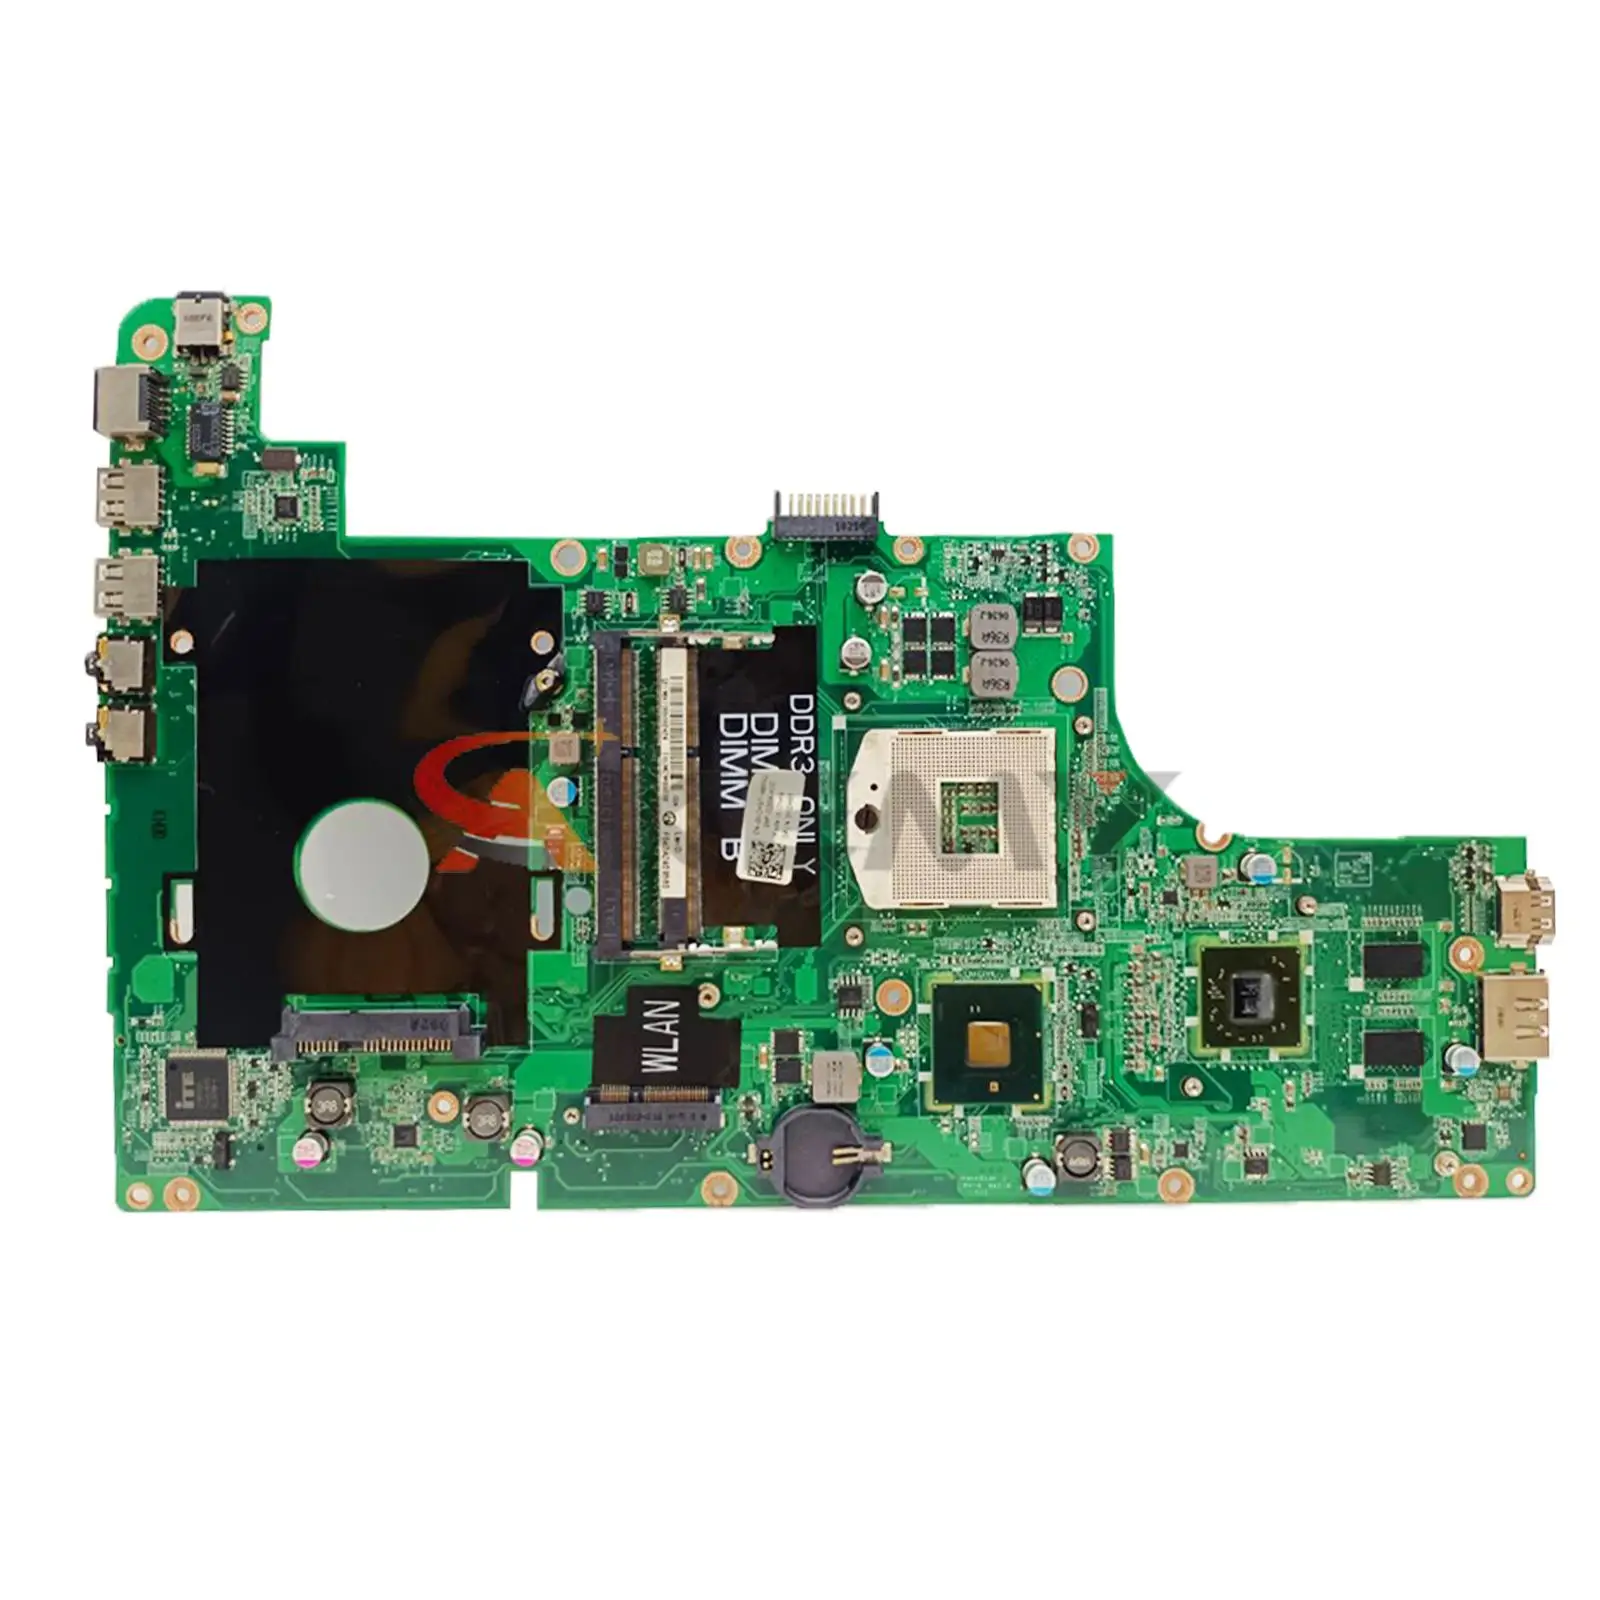 

CN-0Y5C30 DAUM7CMB6C0 Laptop Motherboard Mainboard for Dell Inspiron N3010 Notebook PC HM57 HD4500 DDR3